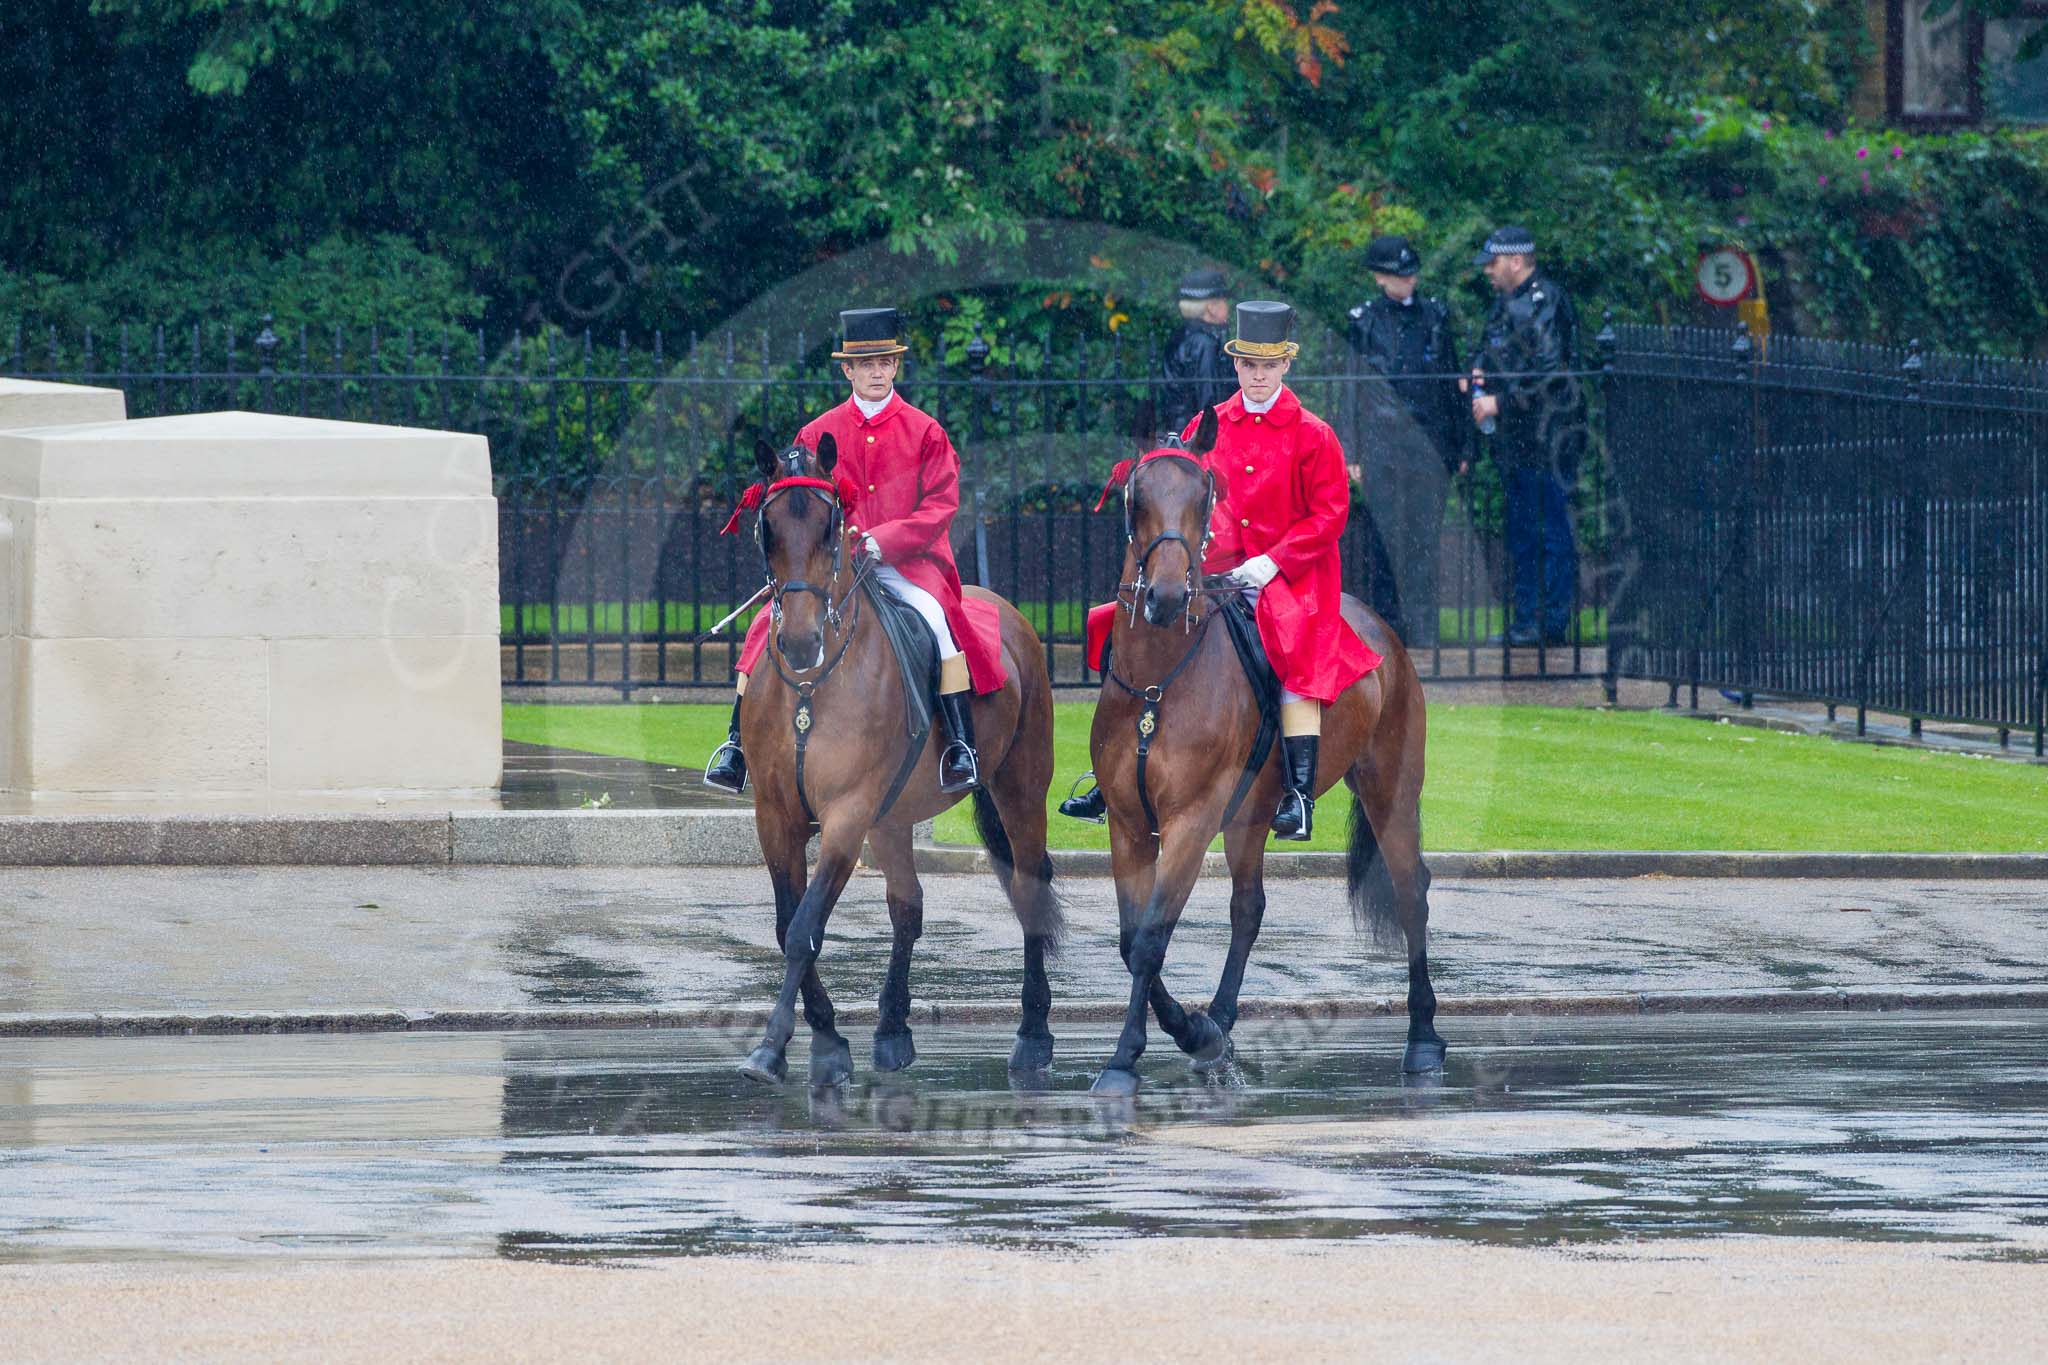 The Colonel's Review 2014.
Horse Guards Parade, Westminster,
London,

United Kingdom,
on 07 June 2014 at 10:50, image #200